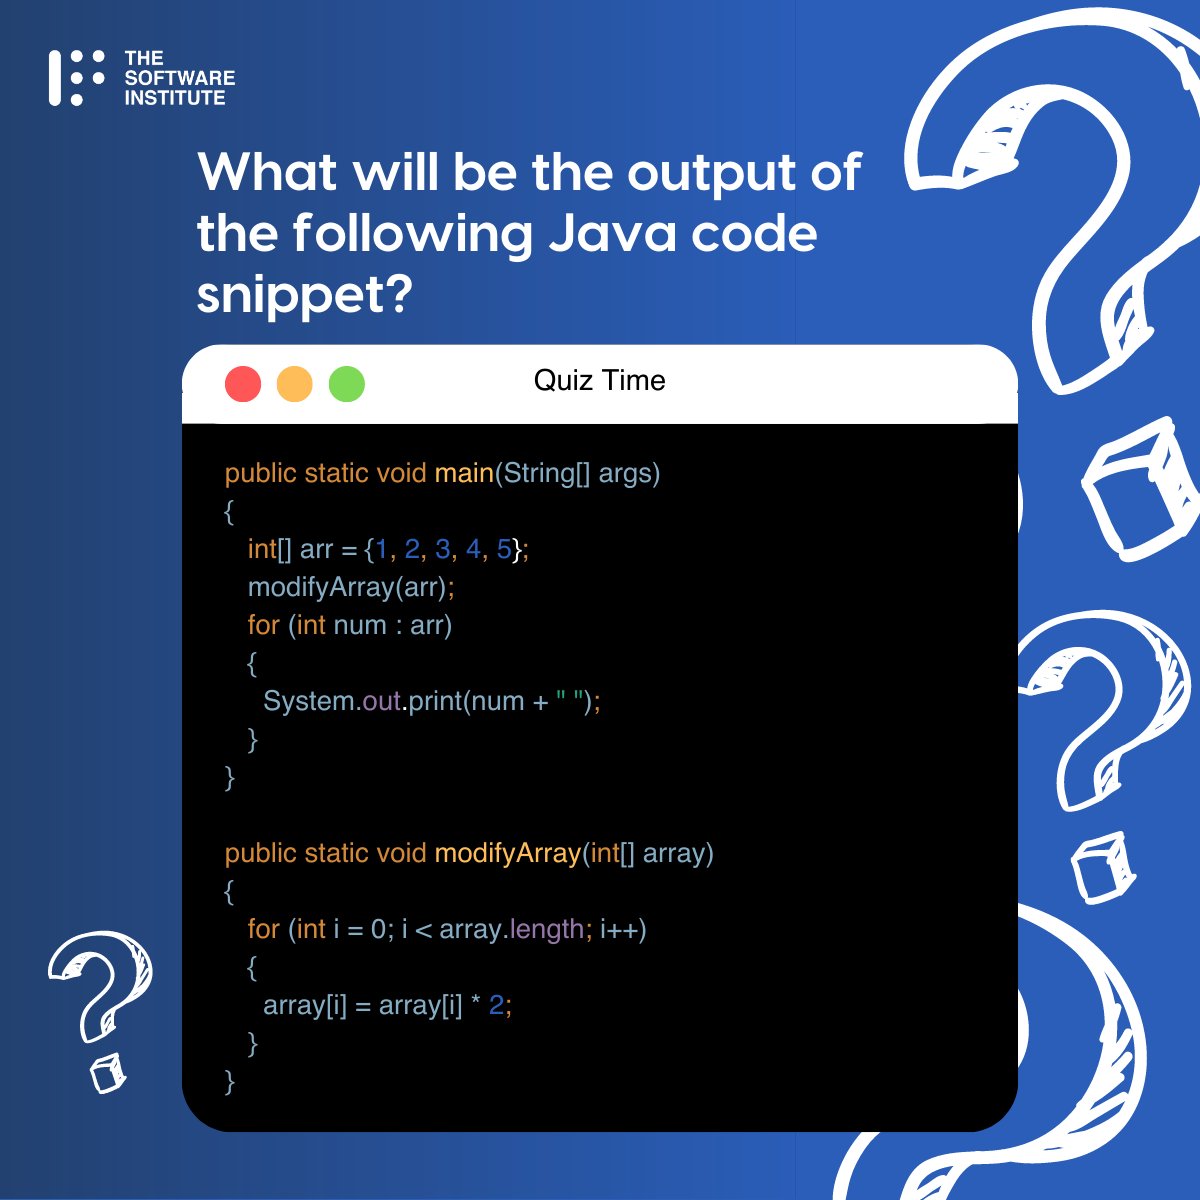 It's time to test your Java knowledge! 🖥  
Guess the output for this code snippet and comment your answer below: 👇 

A) 2 4 6 8 10
B) 1 2 3 4 5
C) 1 4 9 16 25
D) 2 4 8 16 32
 
#techindustry #consultingskills #problemsolving #java #javacode #javaquiz  #tsi #softwareinstitute